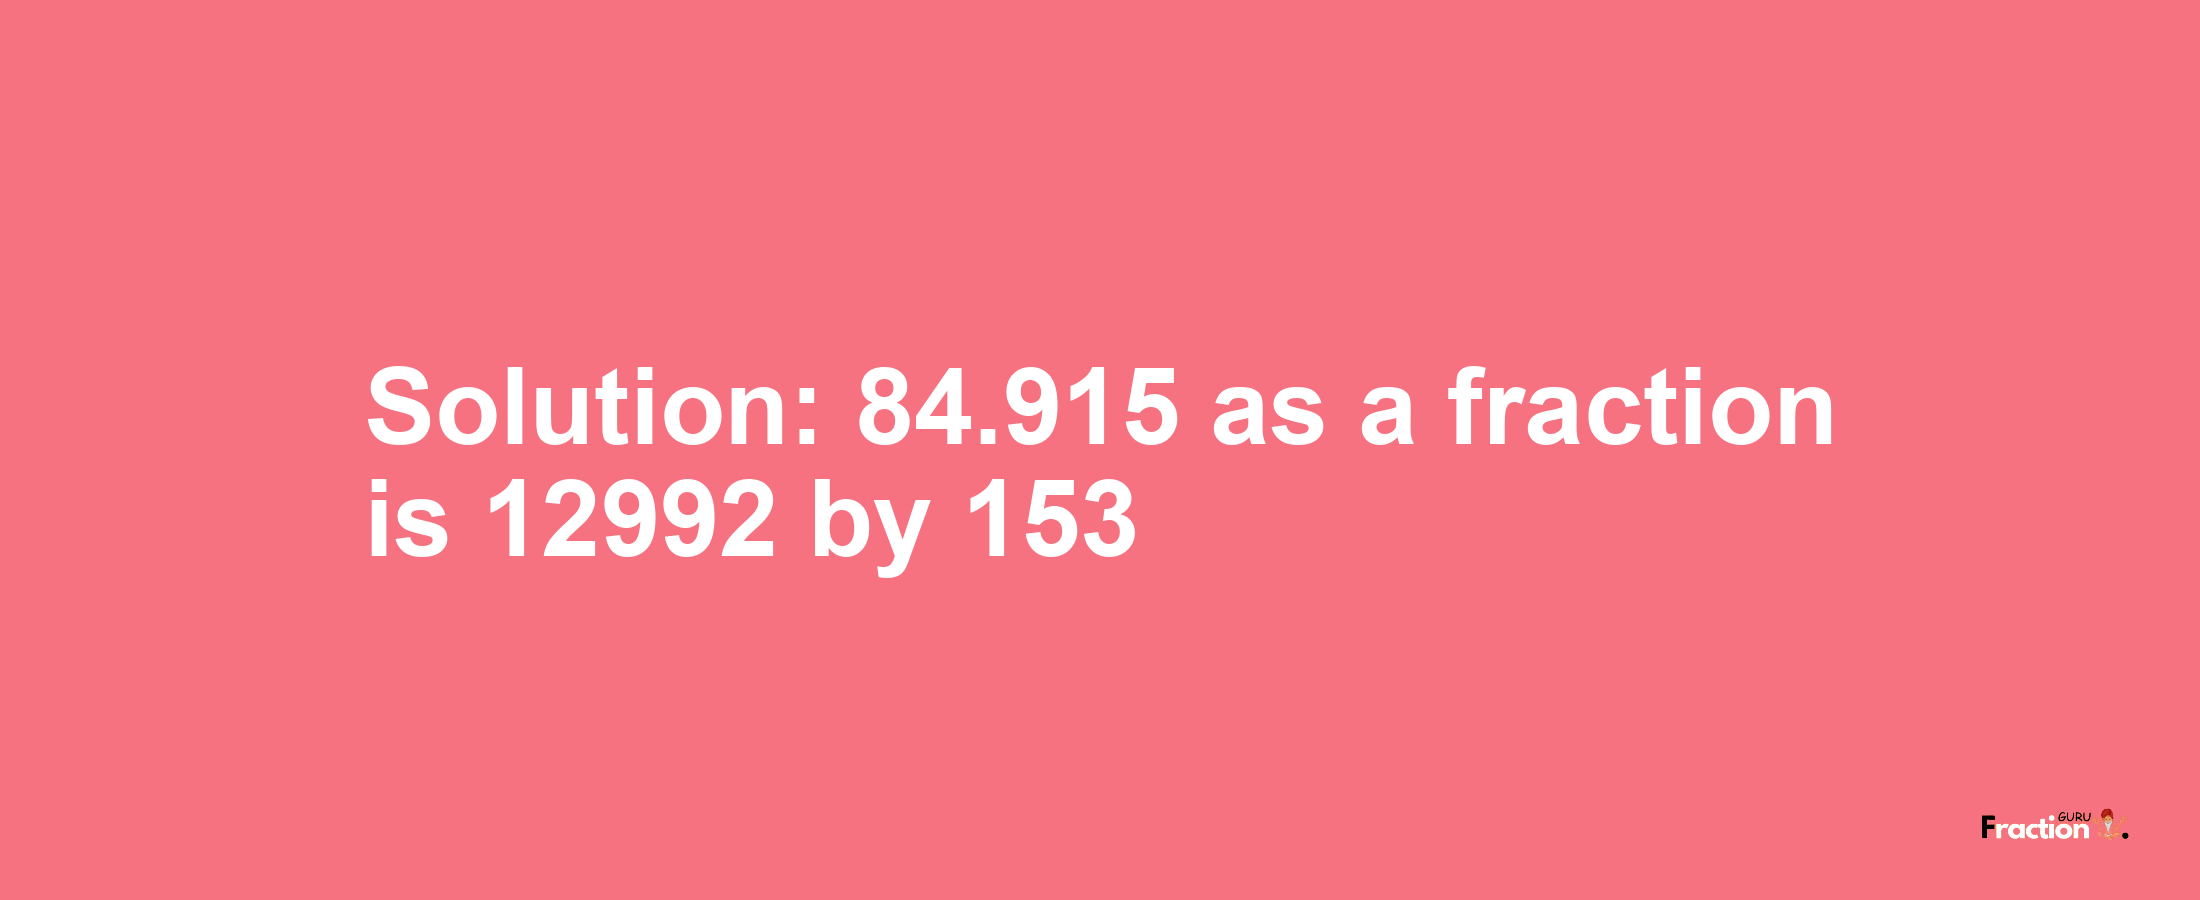 Solution:84.915 as a fraction is 12992/153